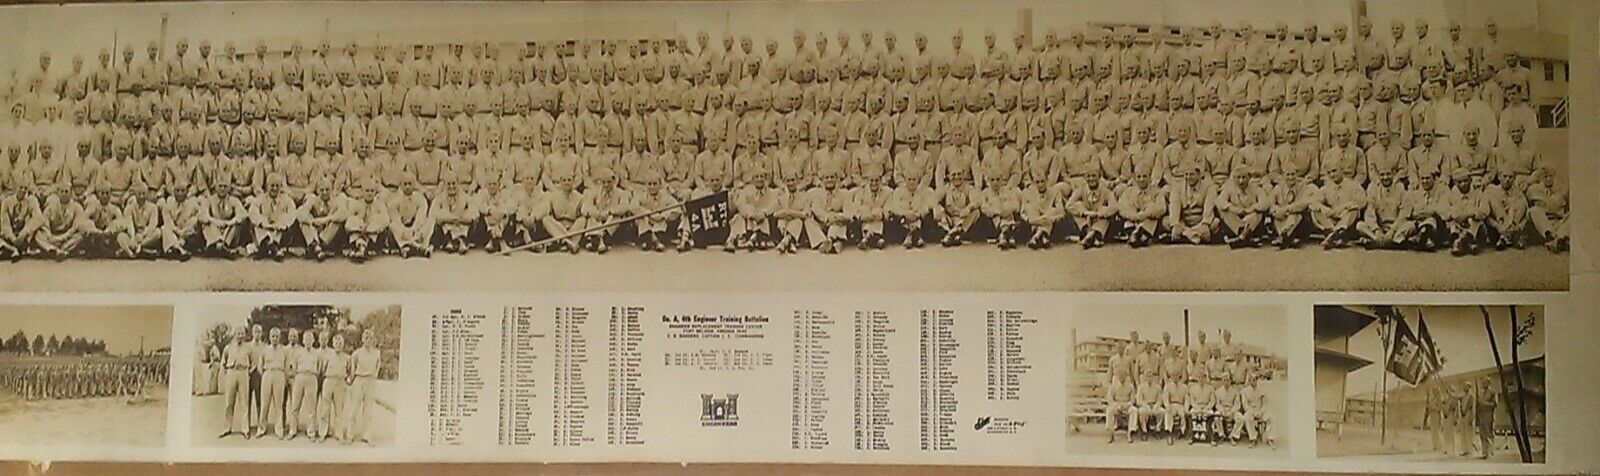 1942 Panoramic Photo - Co. A, 4th Engineer Training Batt. - ALL NAMES IN LISTING